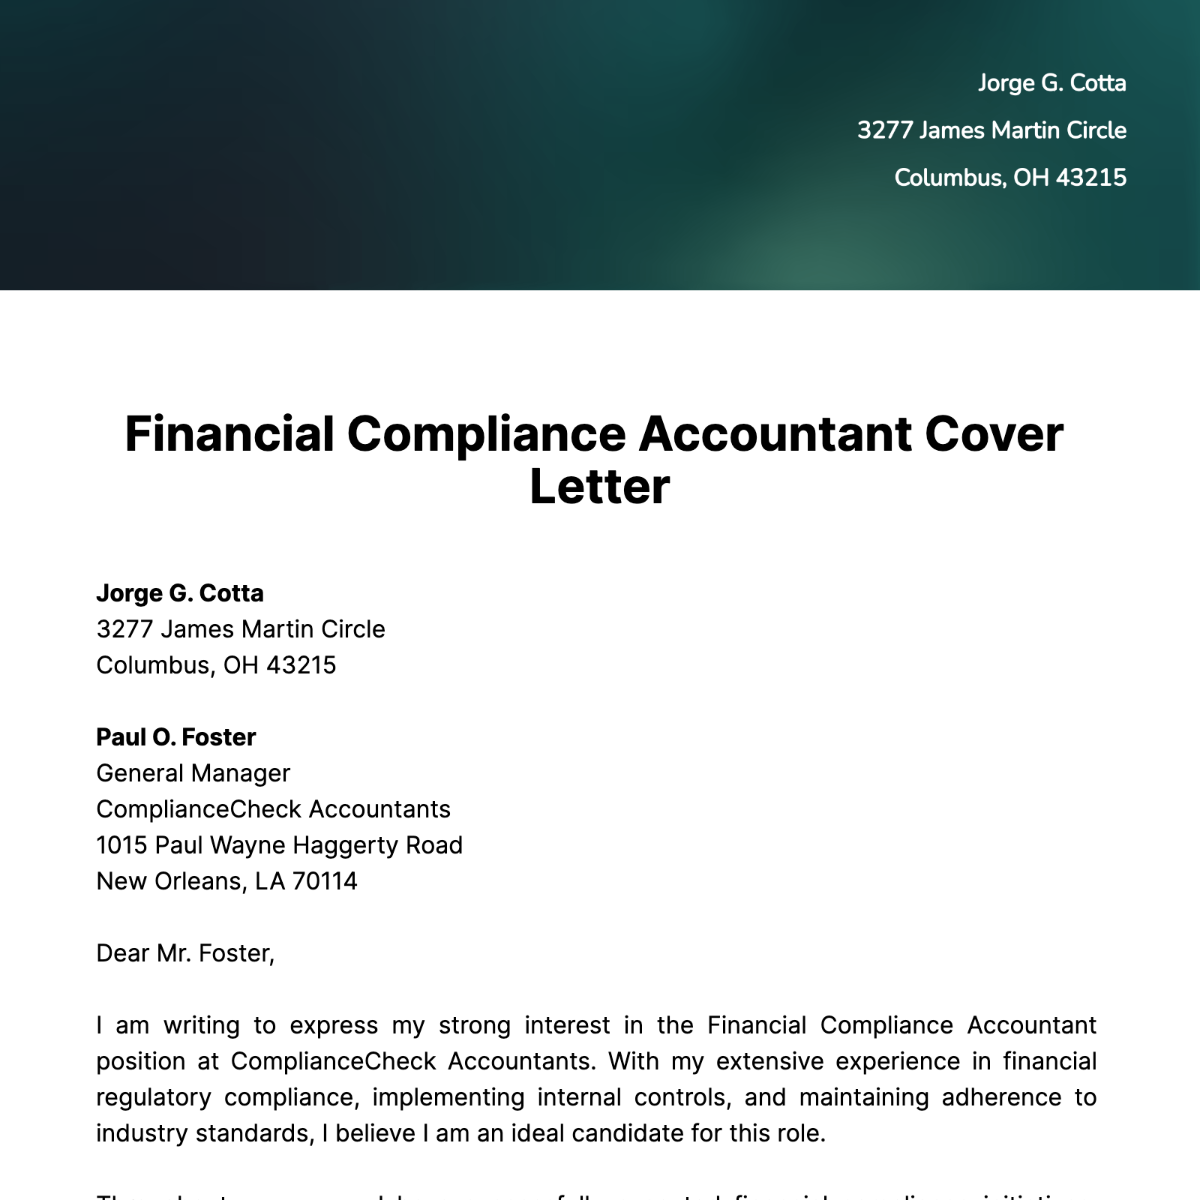 Financial Compliance Accountant Cover Letter Template